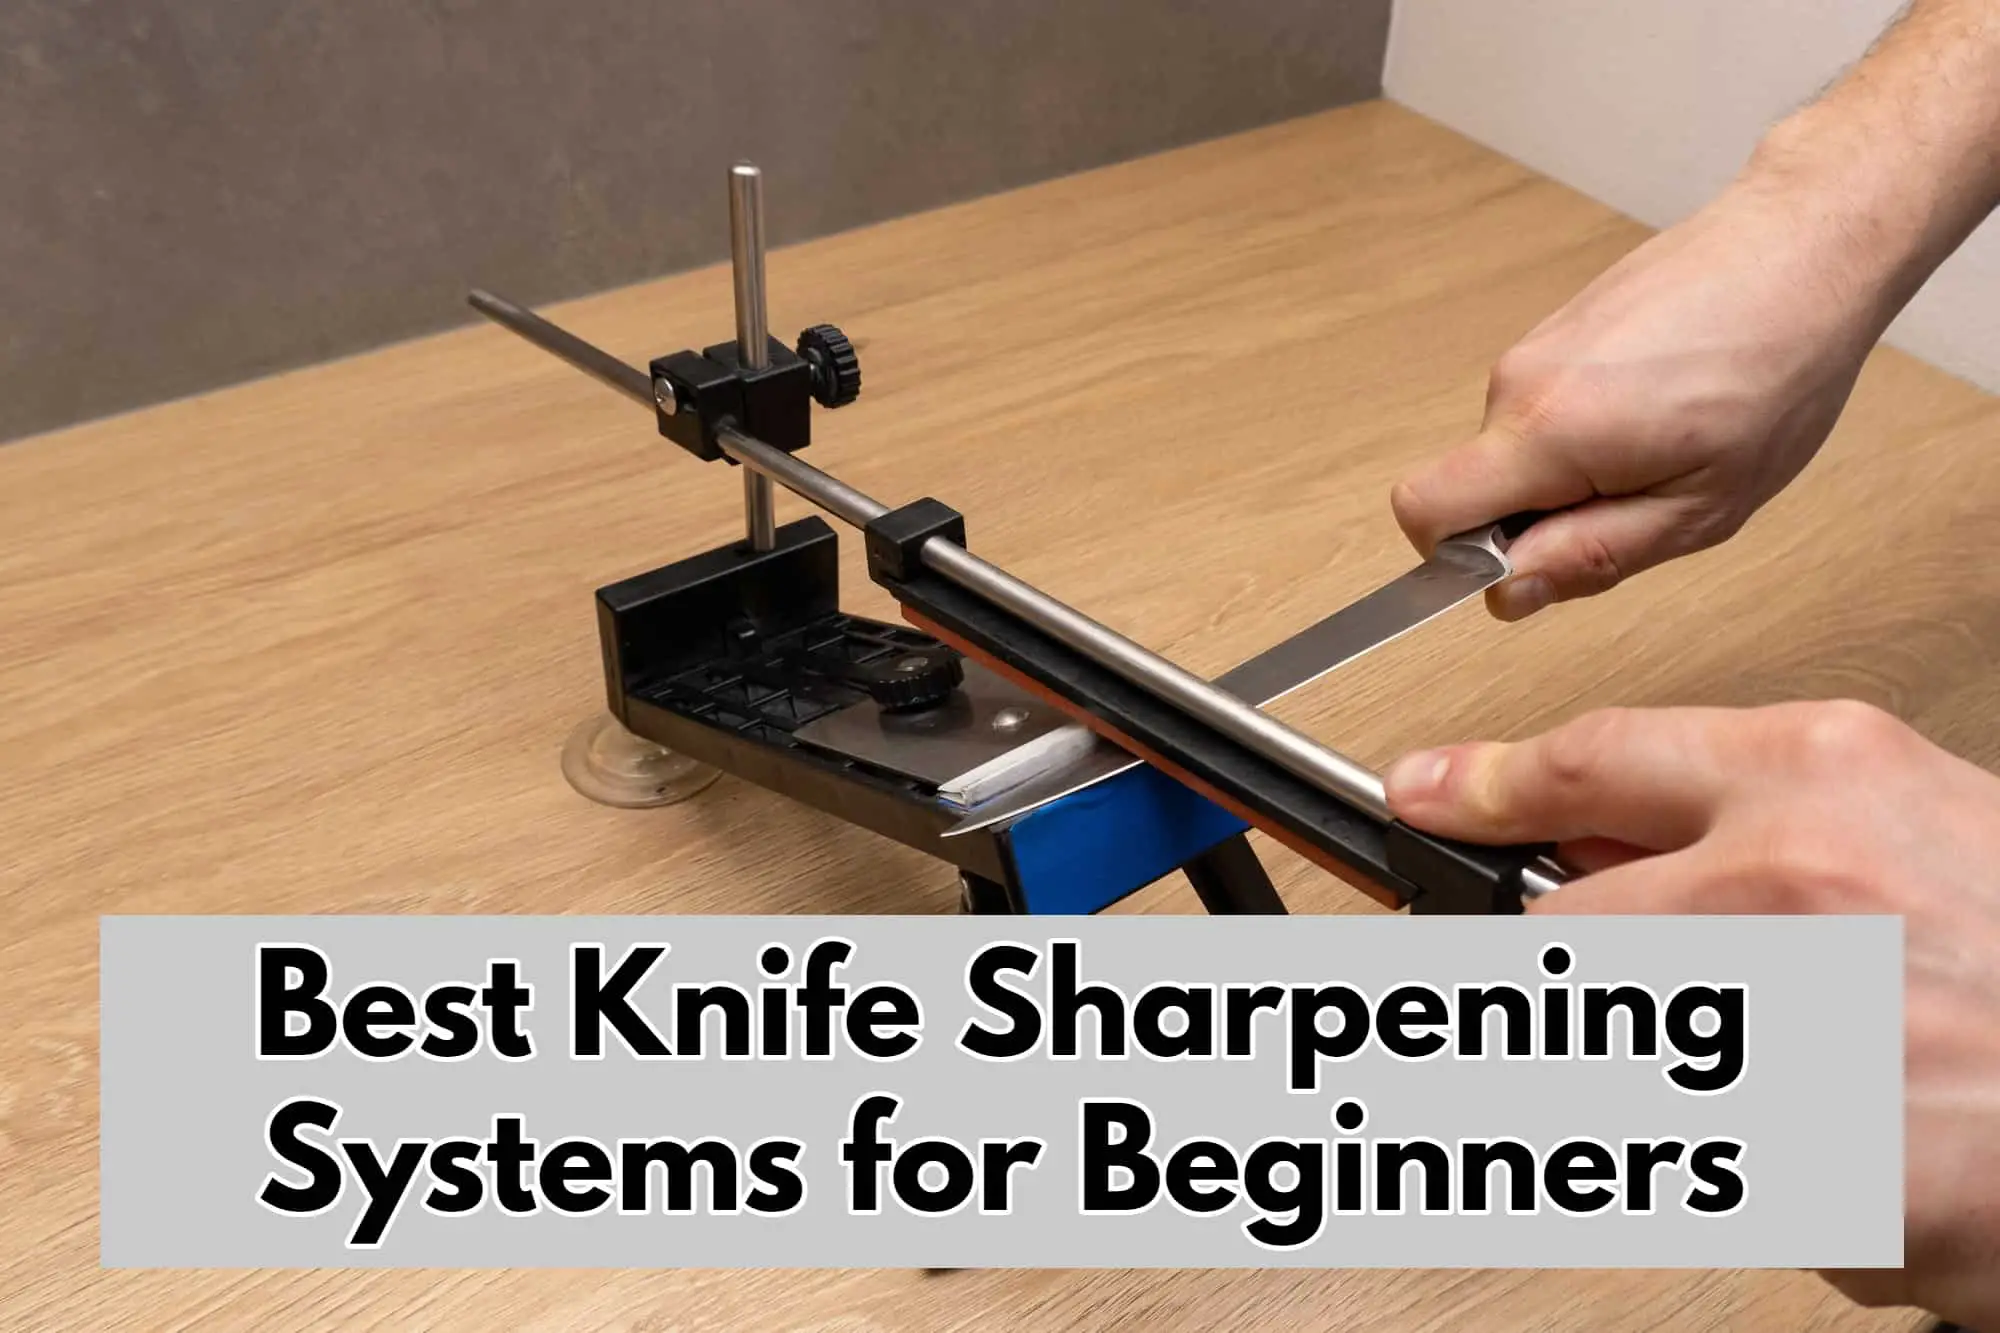 Best Knife Sharpening Systems for Beginners